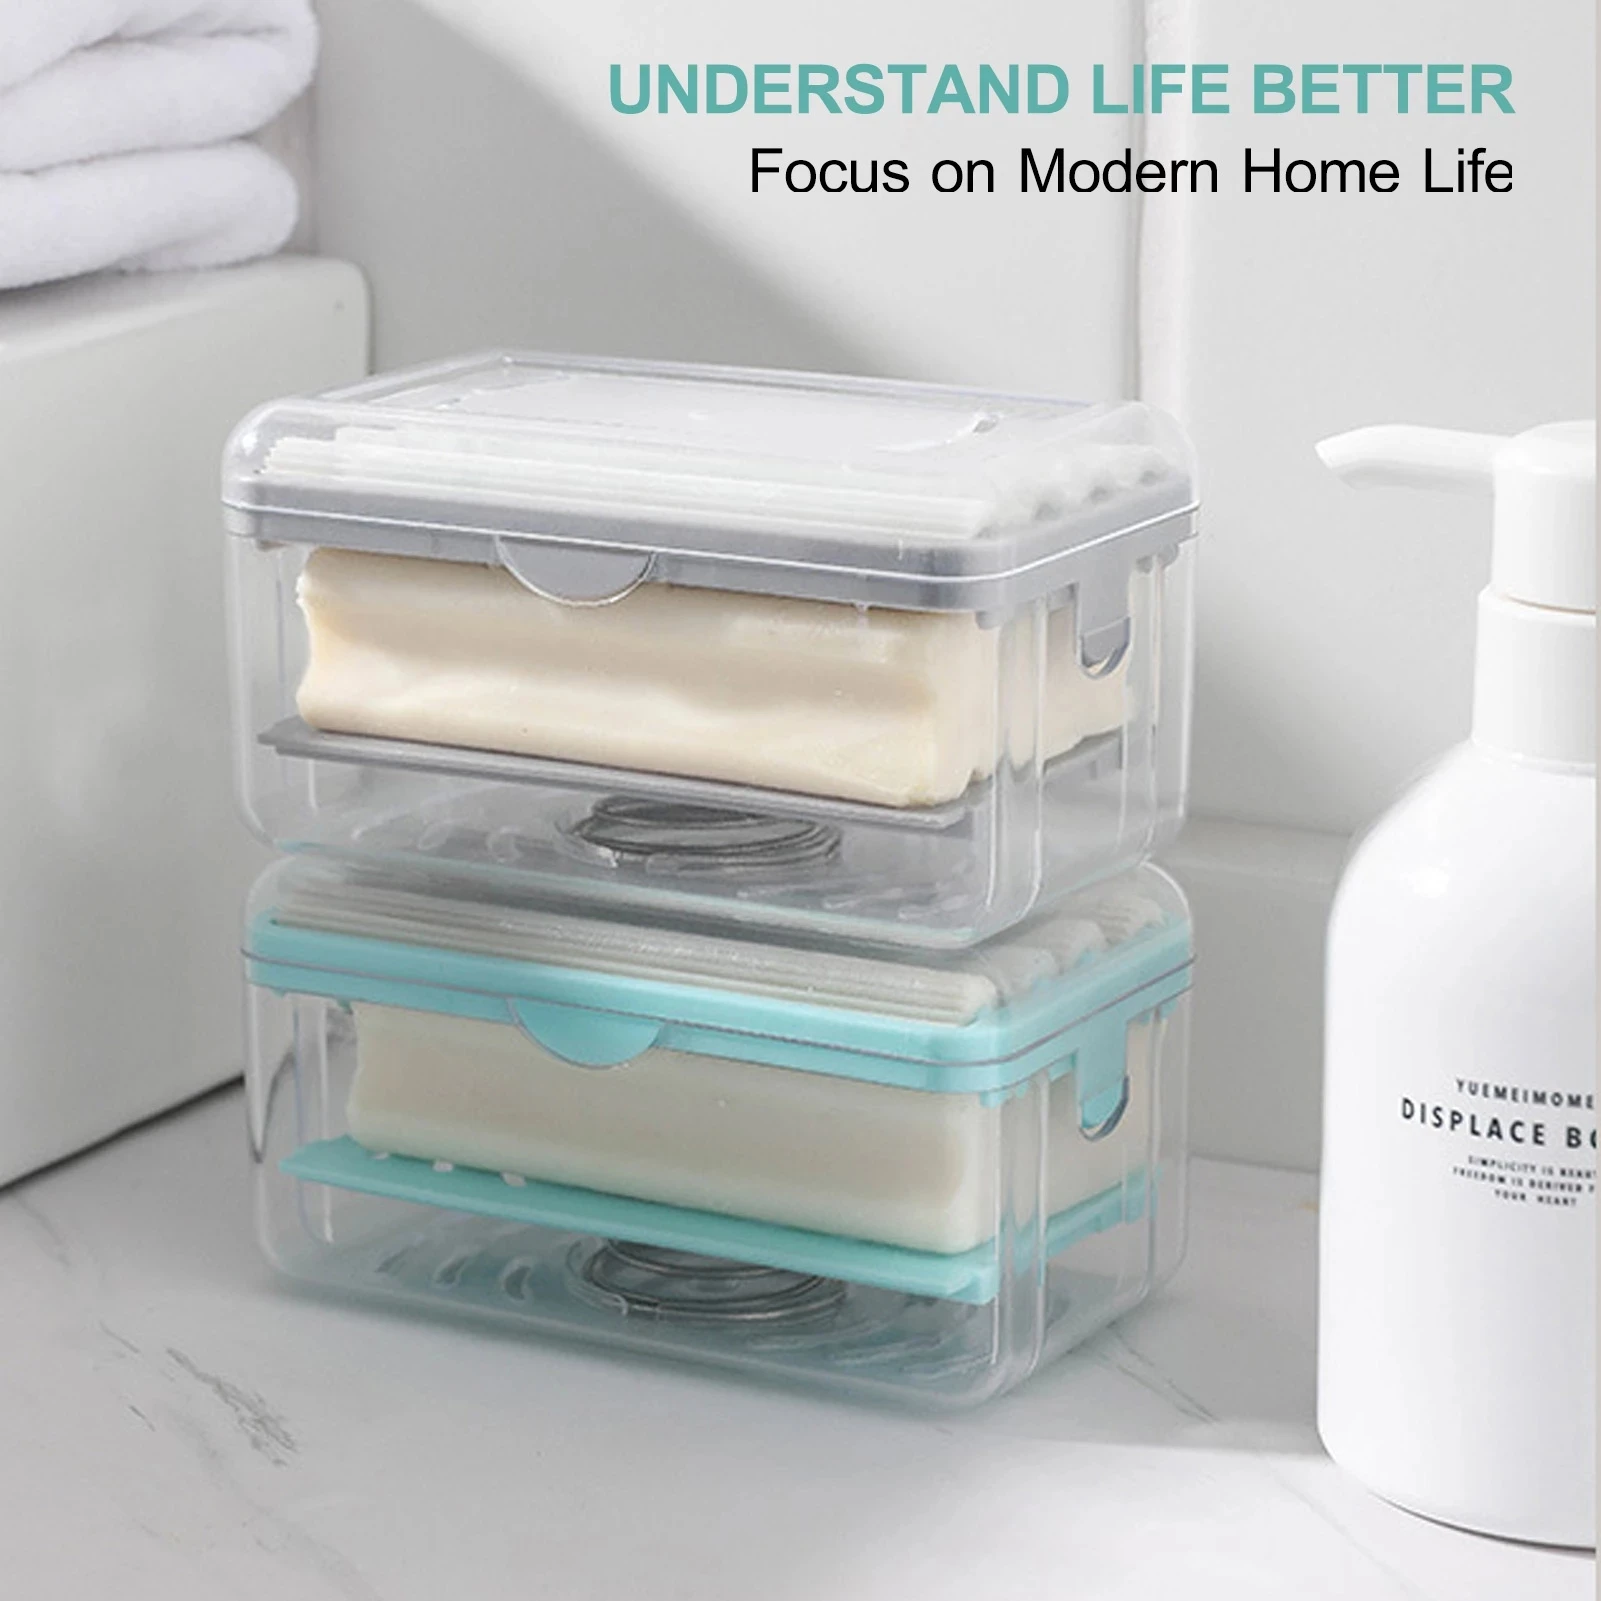 https://ae01.alicdn.com/kf/S2058aac7aac84235a37a3e4fa2e10d55M/Multifunctional-Soap-Dish-New-Usage-Roller-Type-Soap-Dishes-For-Washing-Soap-Holder-Box-Container-Drain.jpg